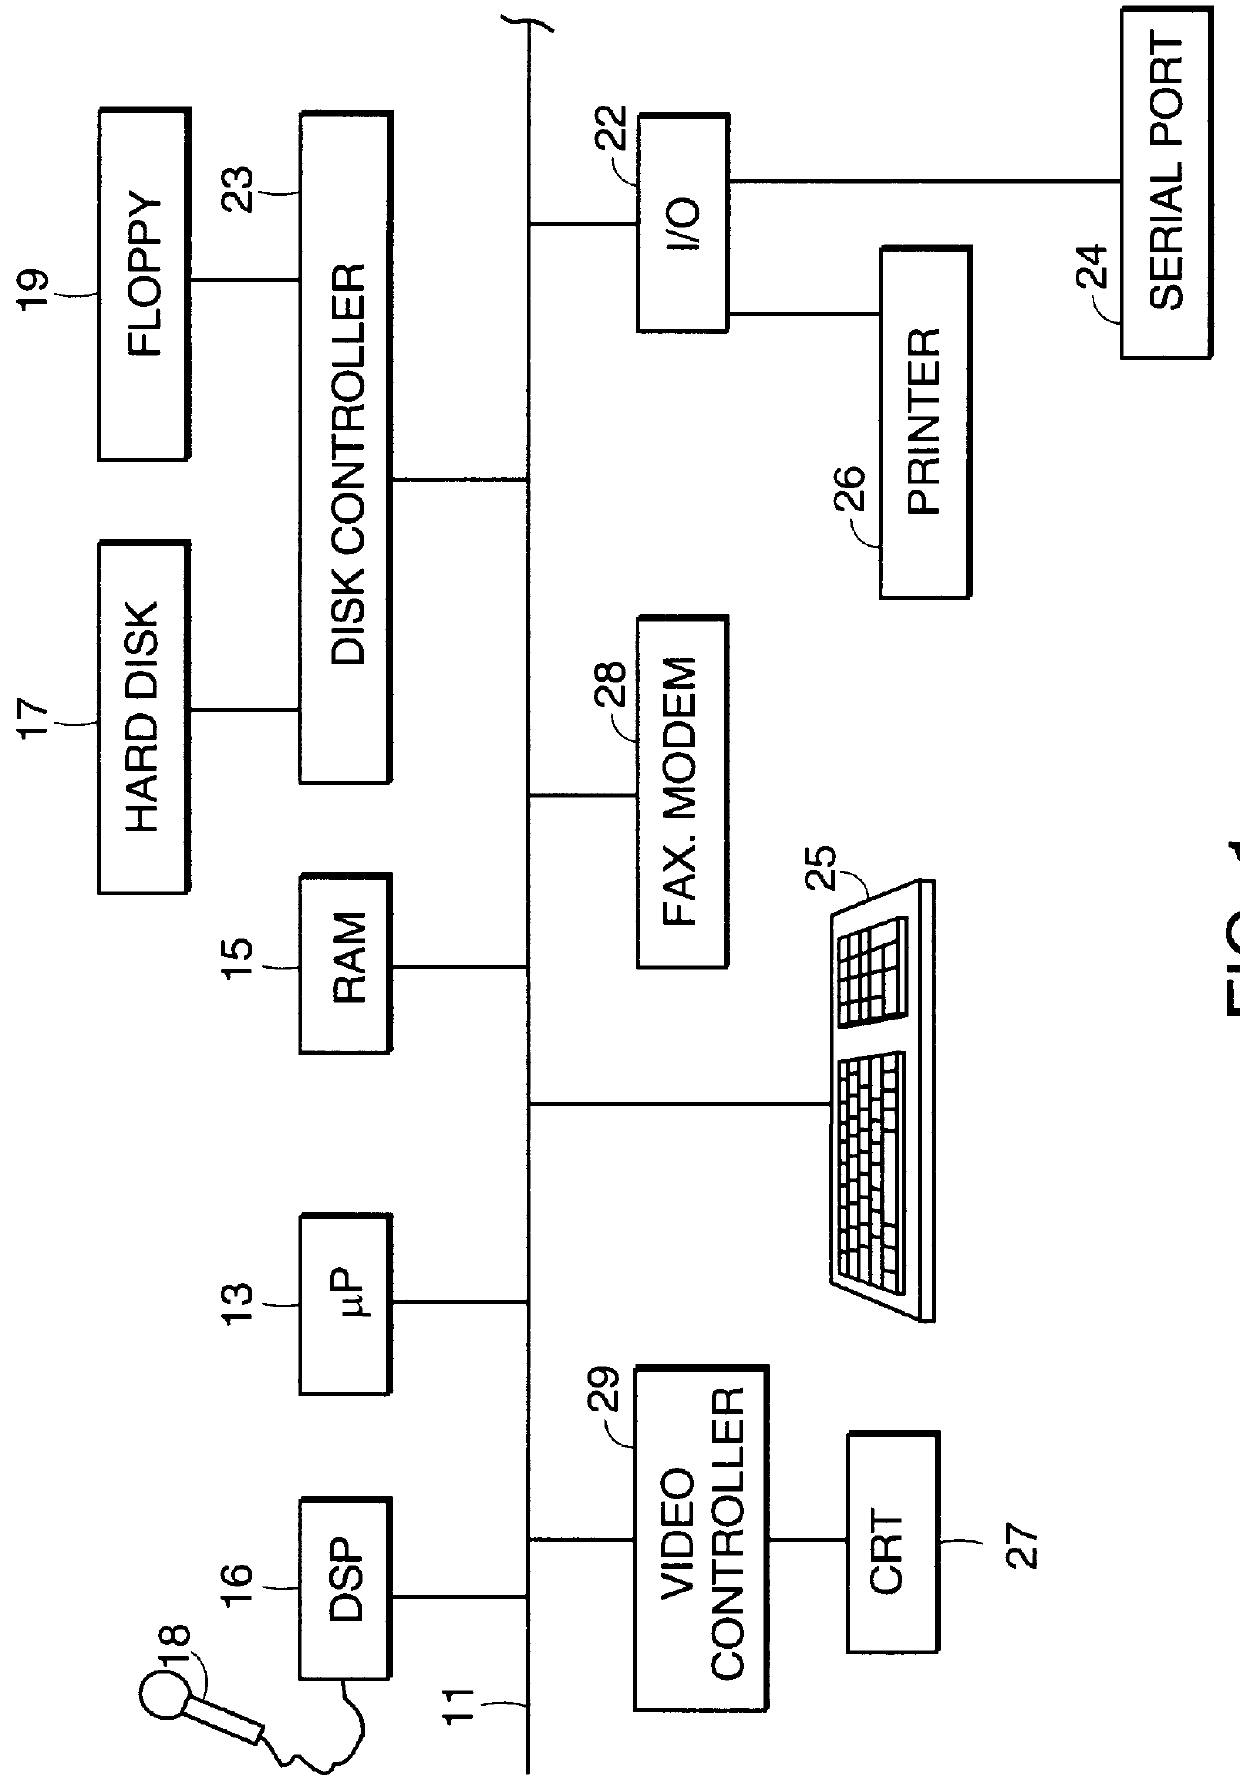 System for controlling multiple user application programs by spoken input